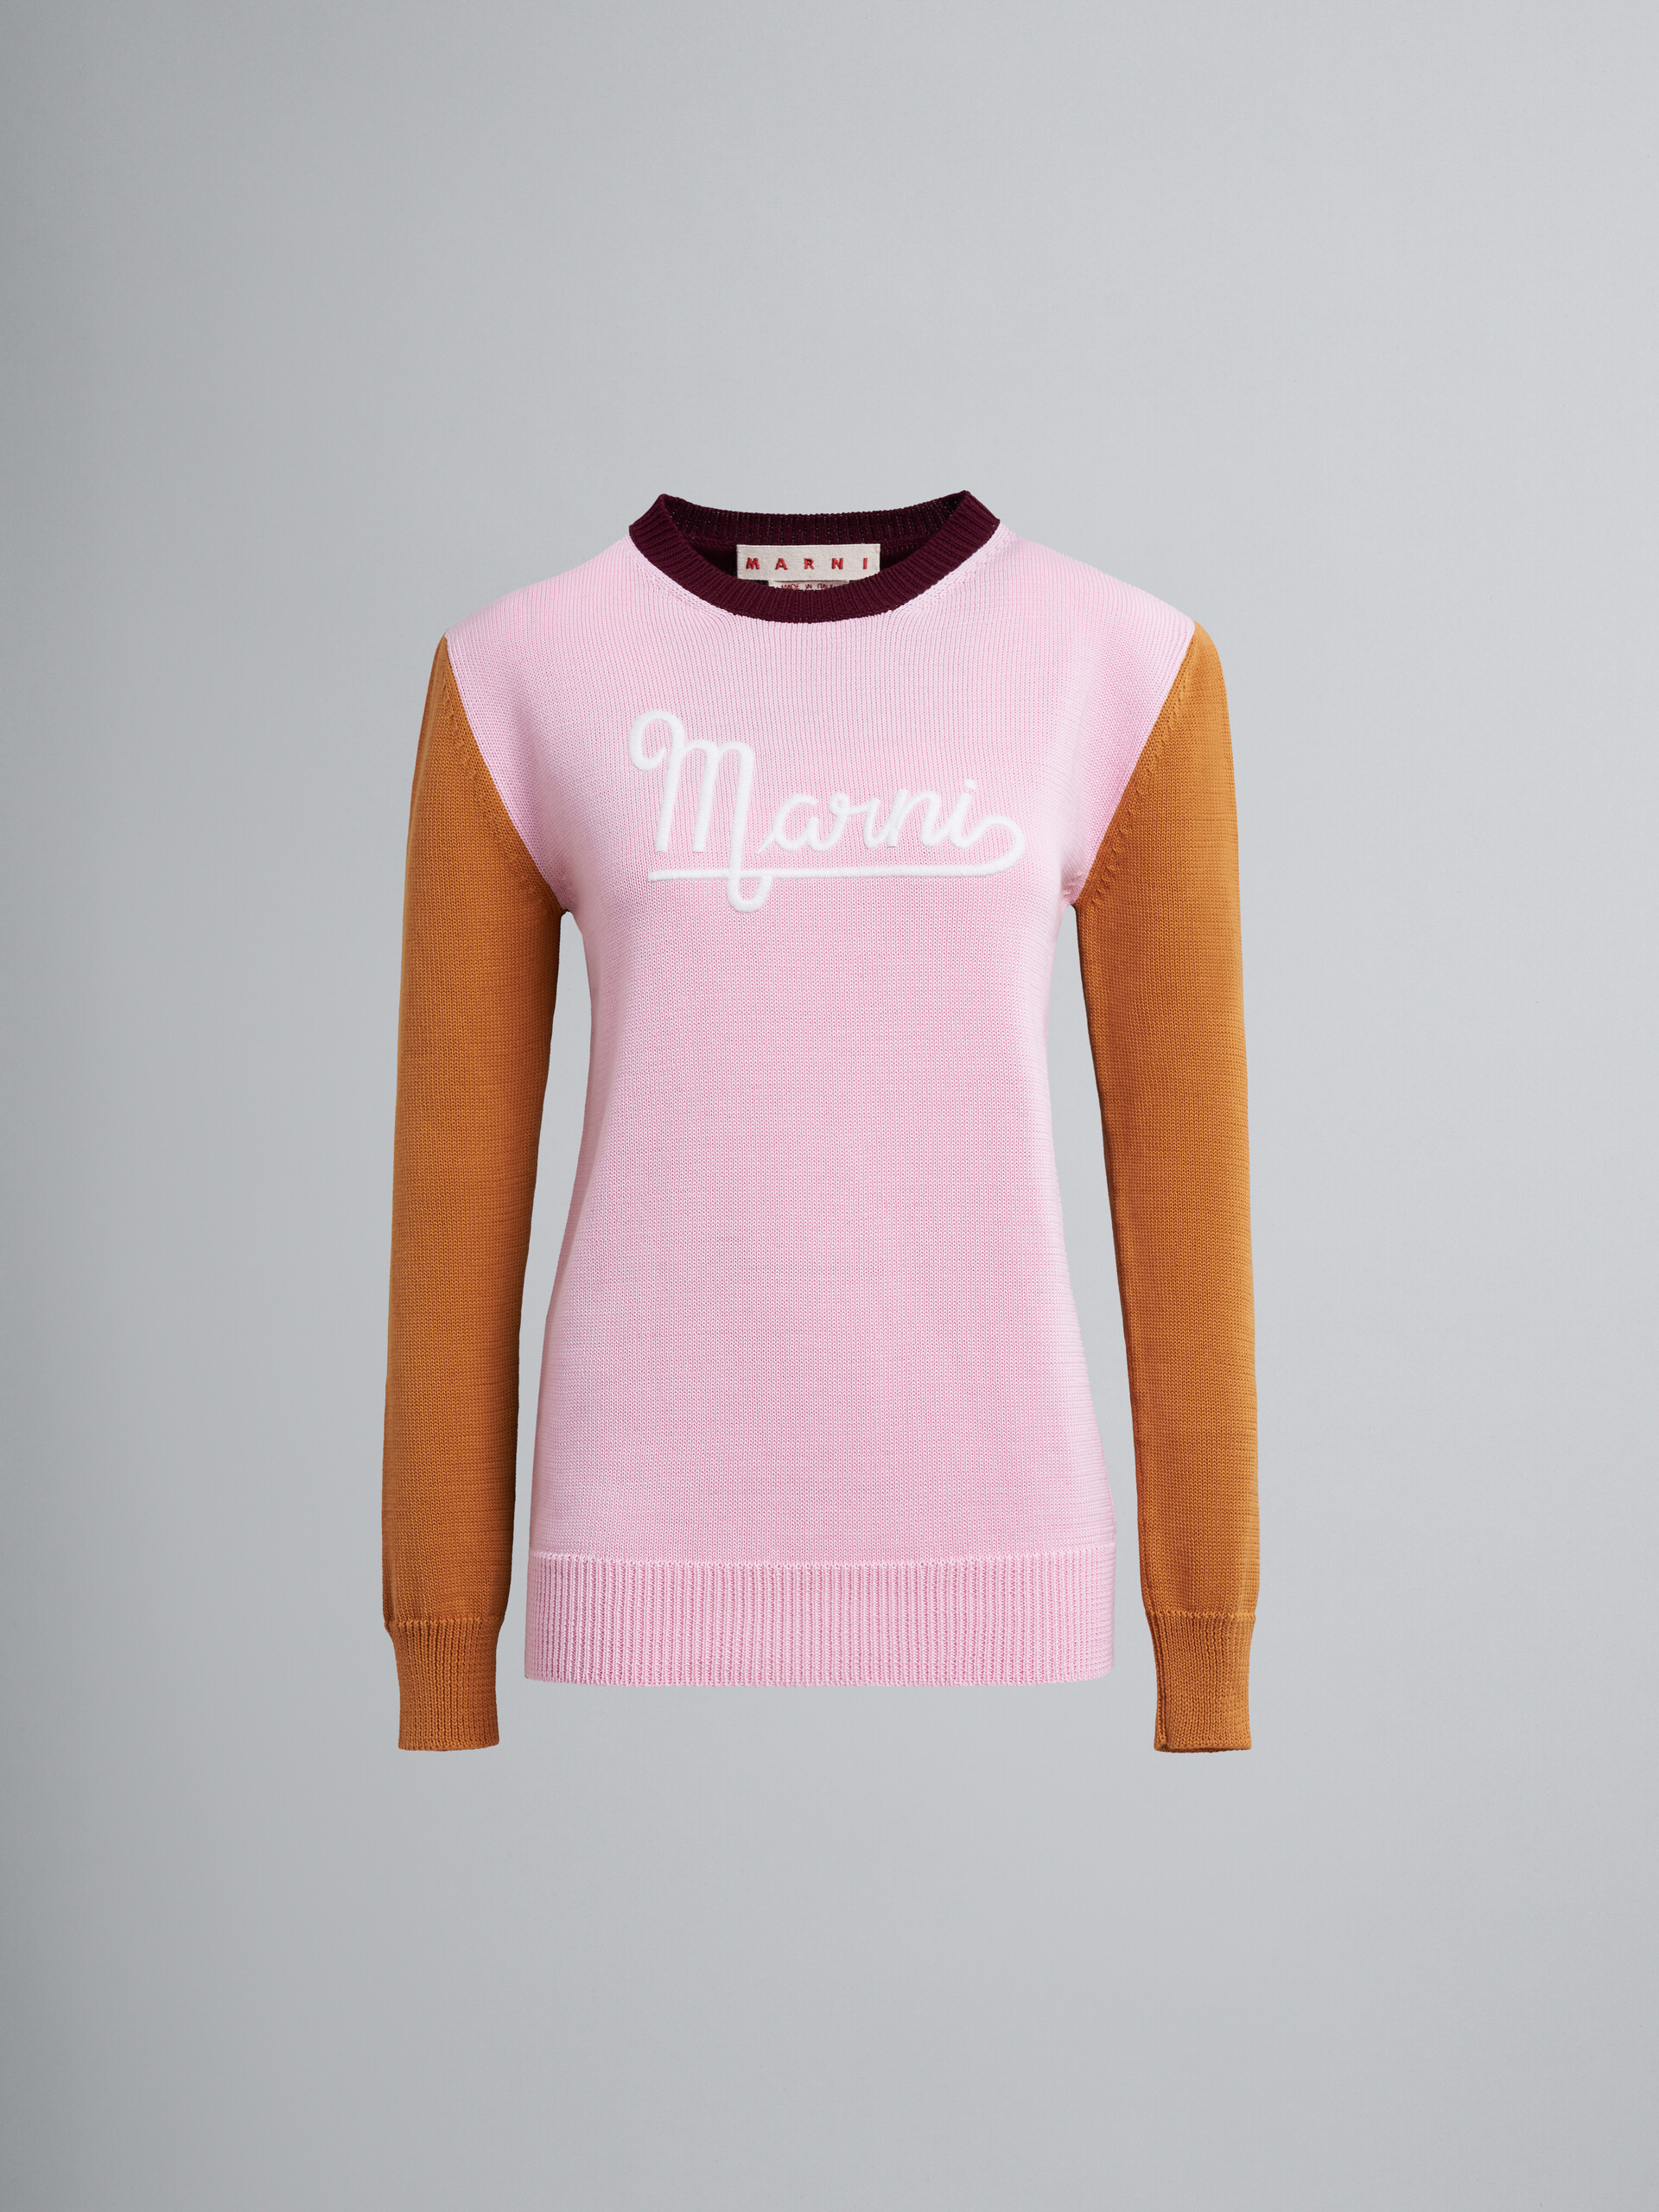 Long-sleeved logo bio cotton sweater - Pullovers - Image 1